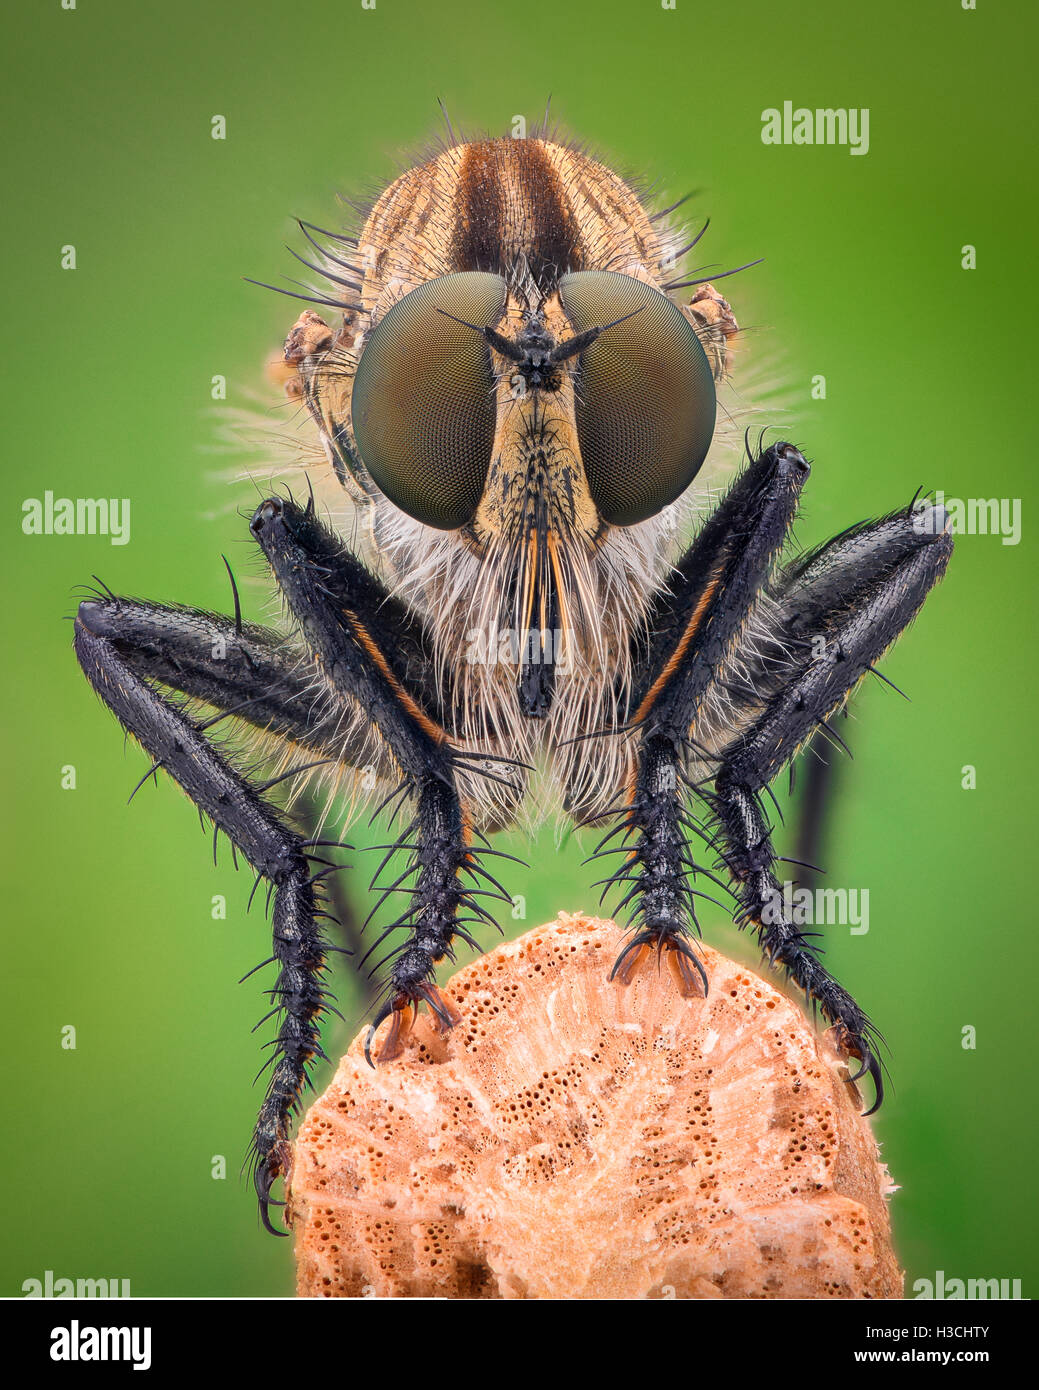 Extreme magnification - Robber fly, front view Stock Photo